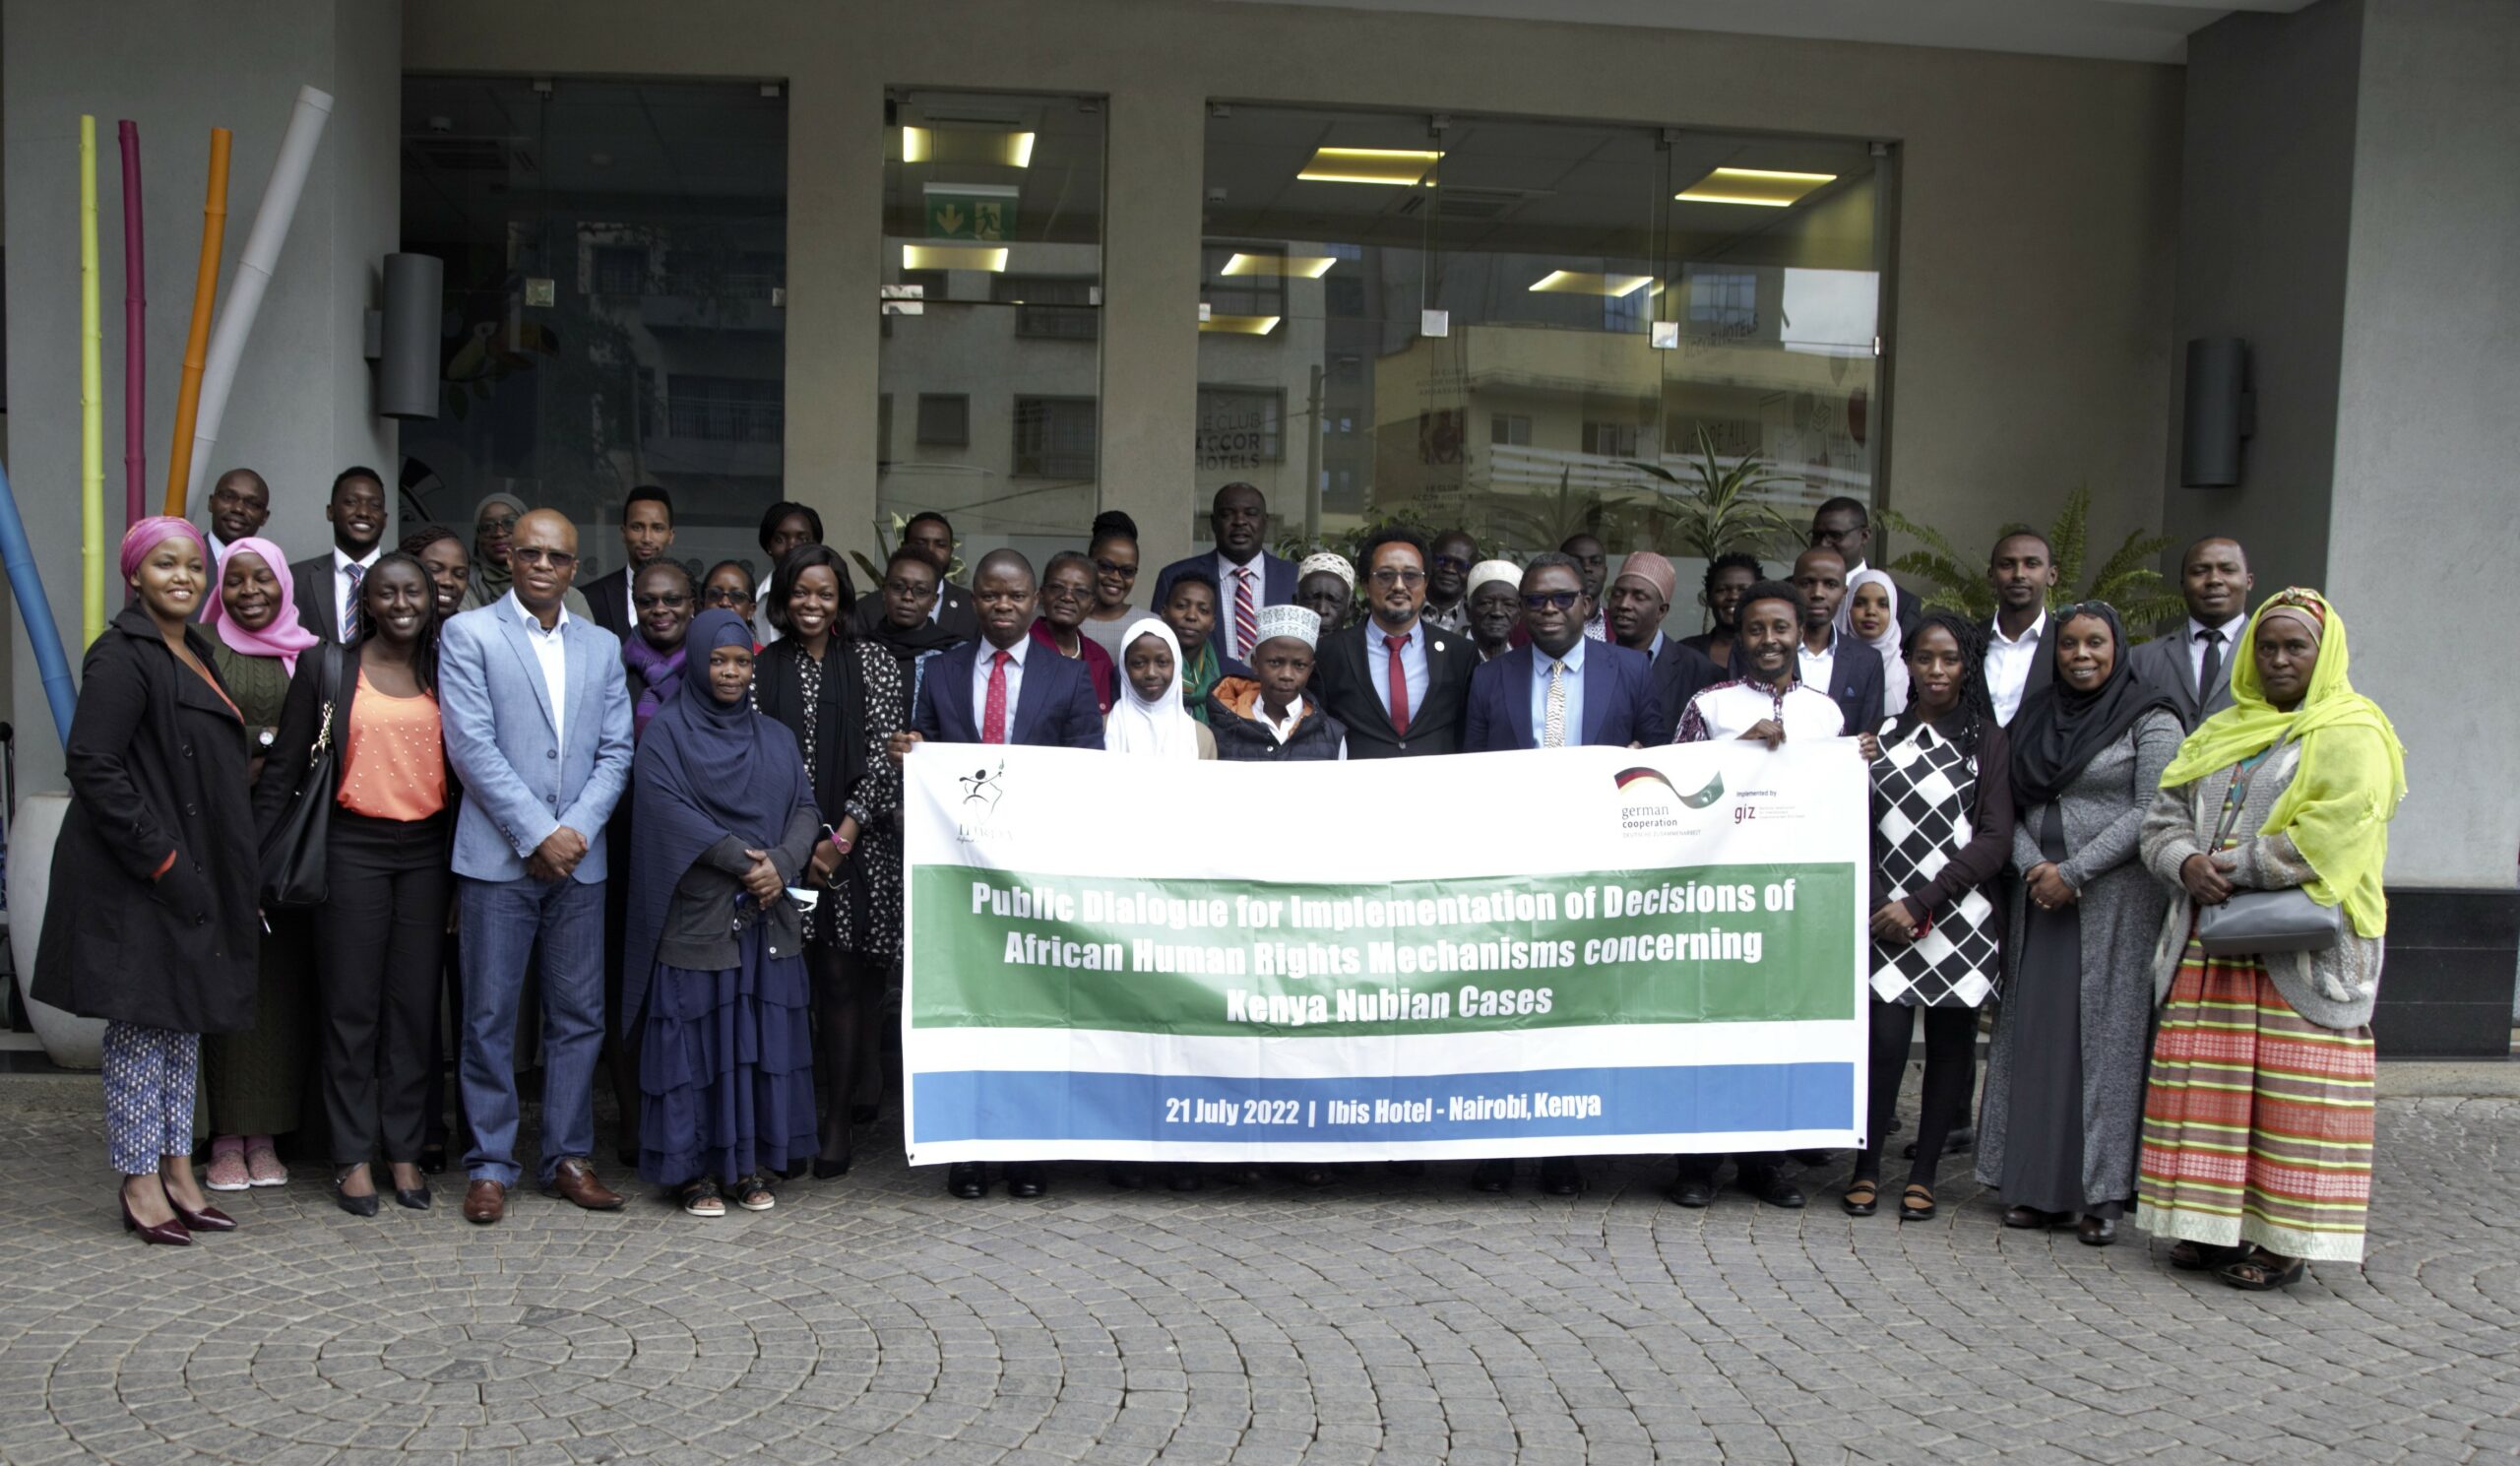 Fostering implementation of decisions of African regional human rights mechanisms: IHRDA organises public dialogue on implementation of decisions on Kenya Nubian cases